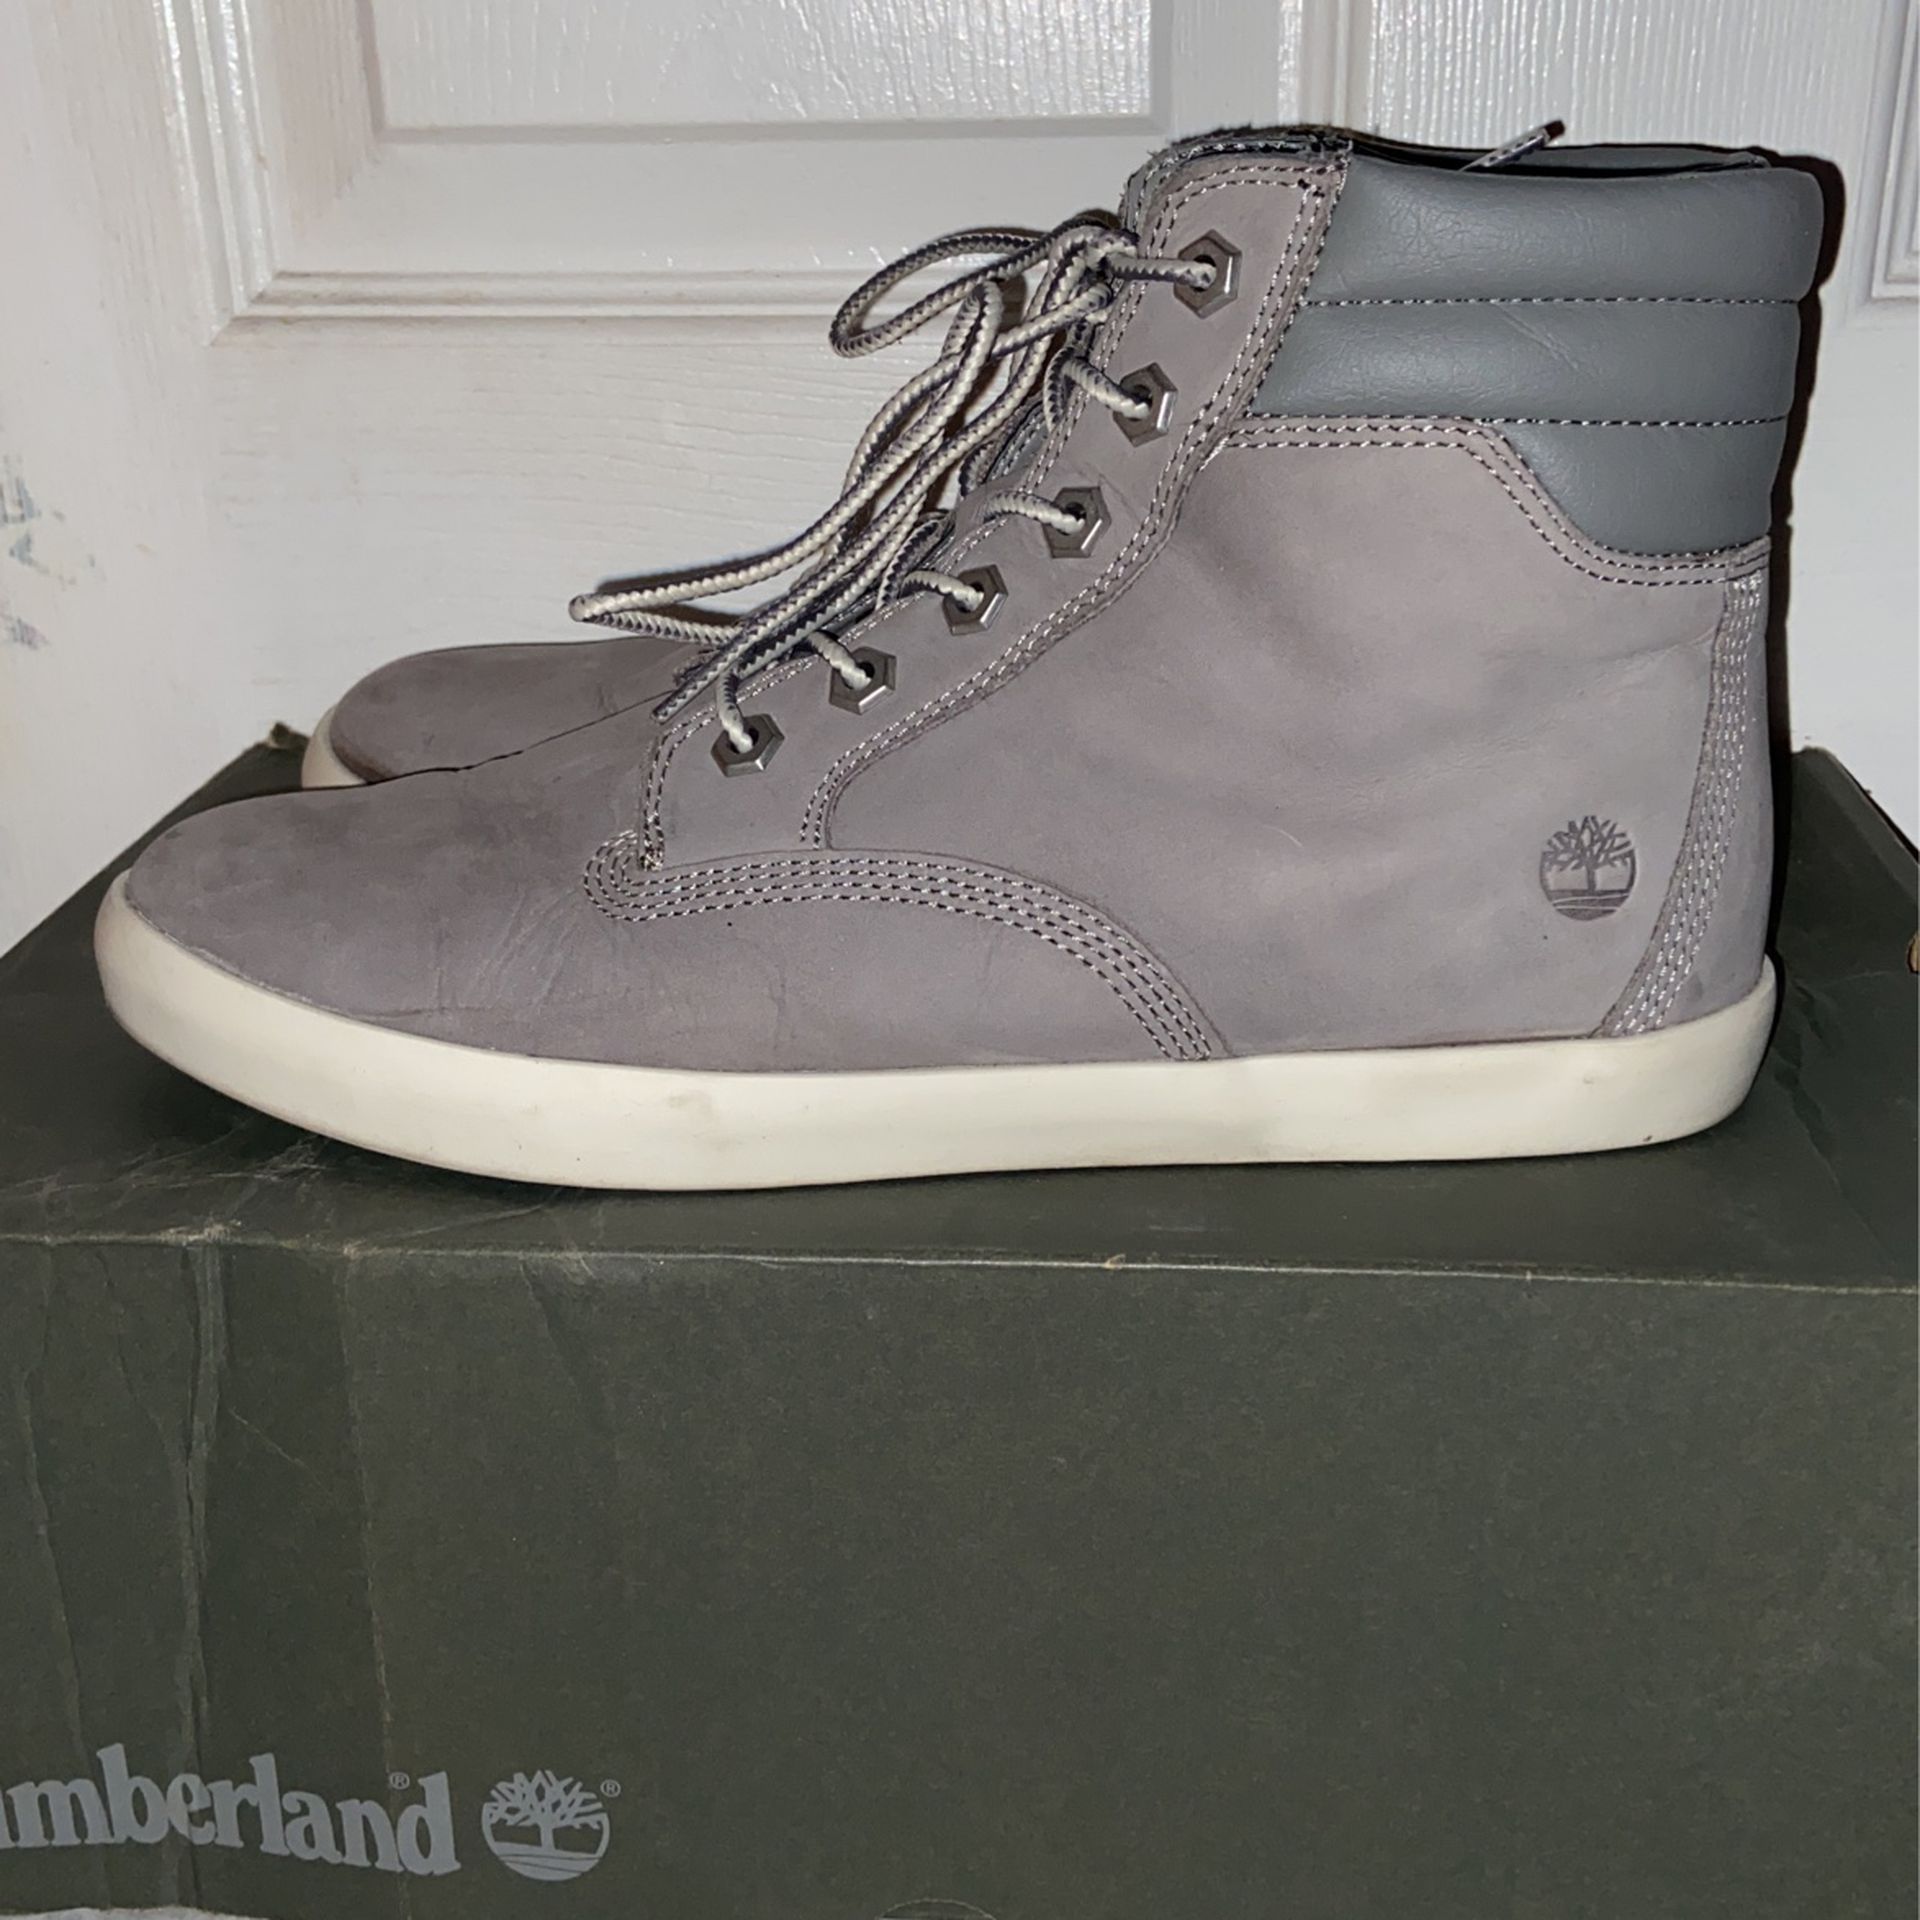 Timberland sneaker boots